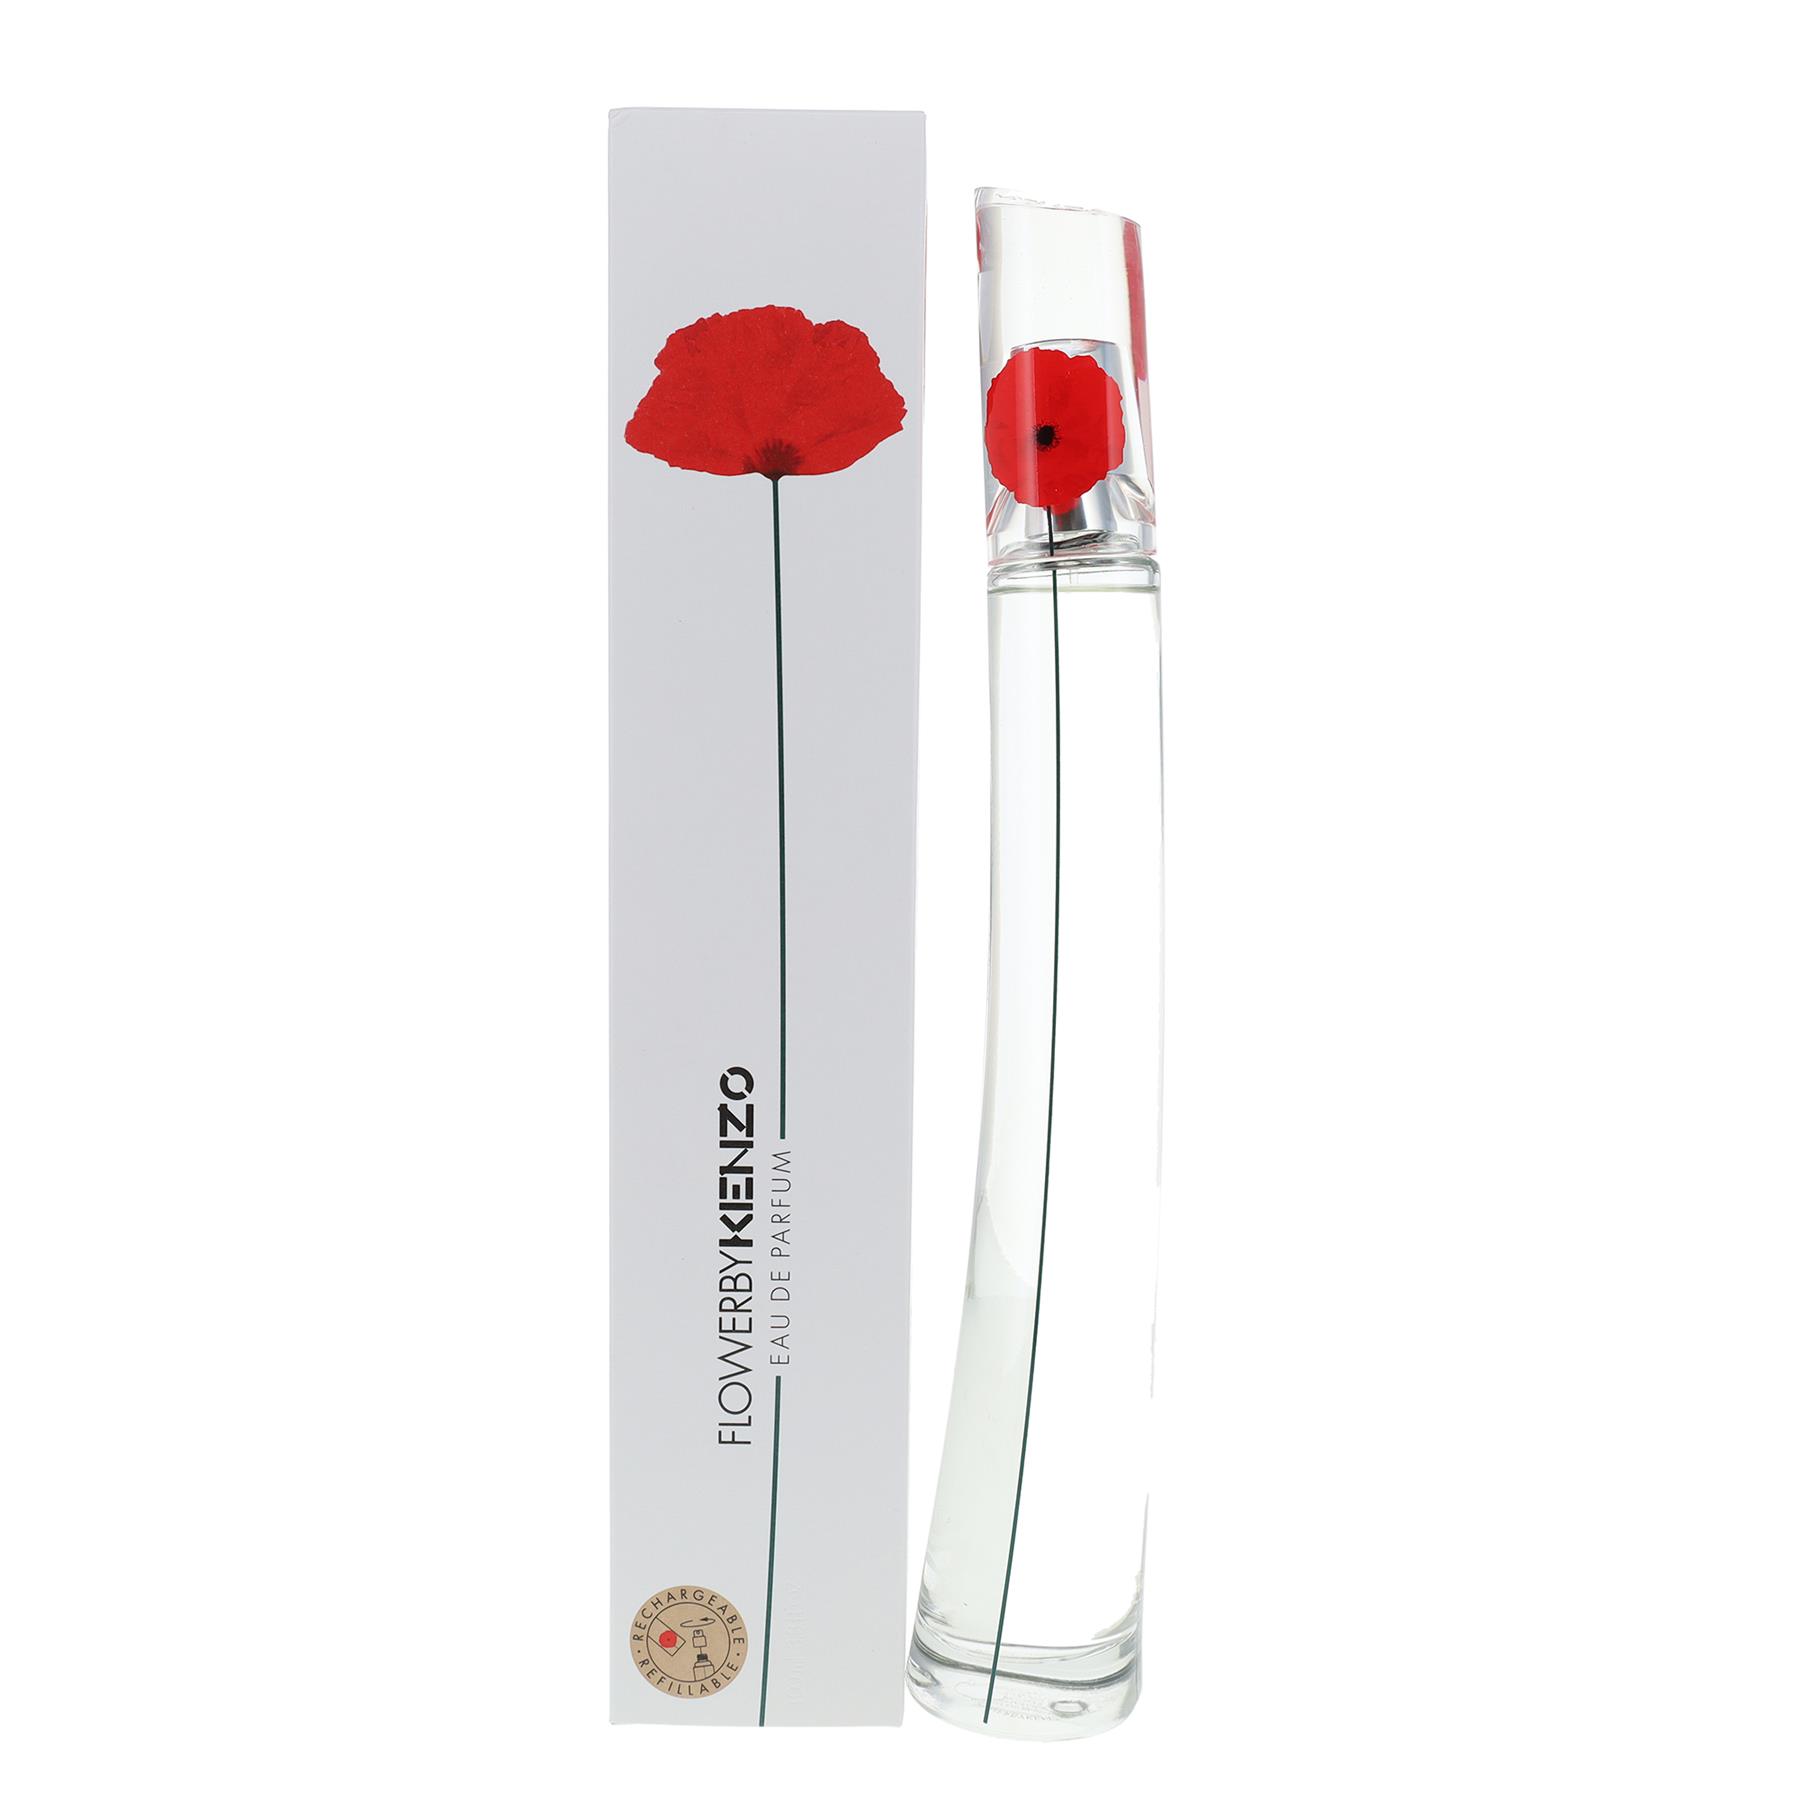 Kenzo Flowers by Kenzo 100ml Eau de Parfum Refillable Spray for Her from Perfume Plus Direct